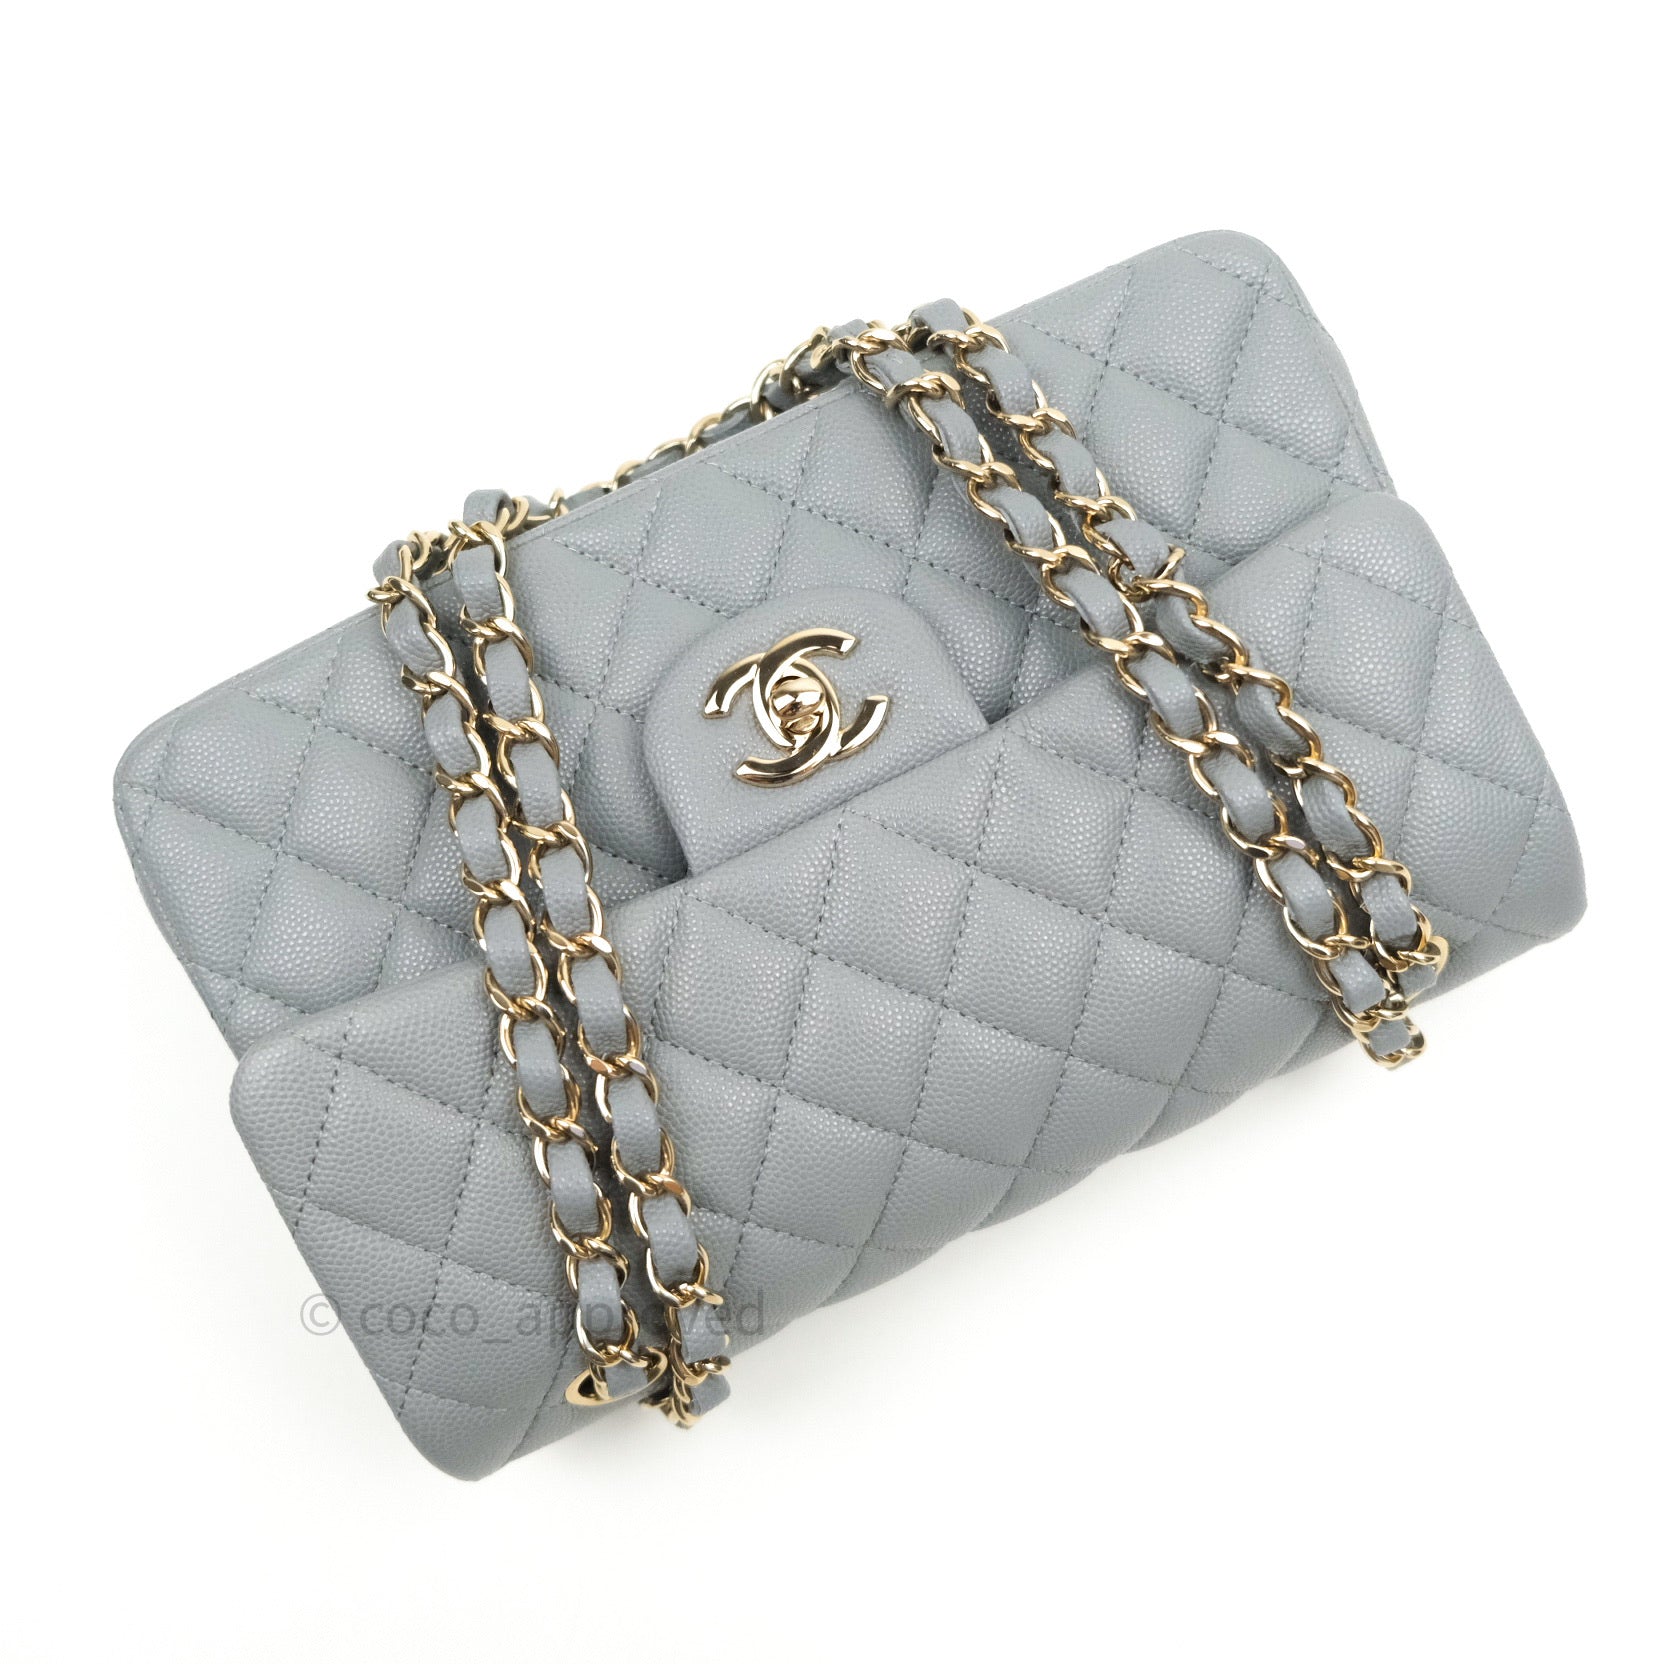 Chanel 21b Dark Grey Medium Classic Flap different Styles and Different  Caviar Leather Comparison  YouTube